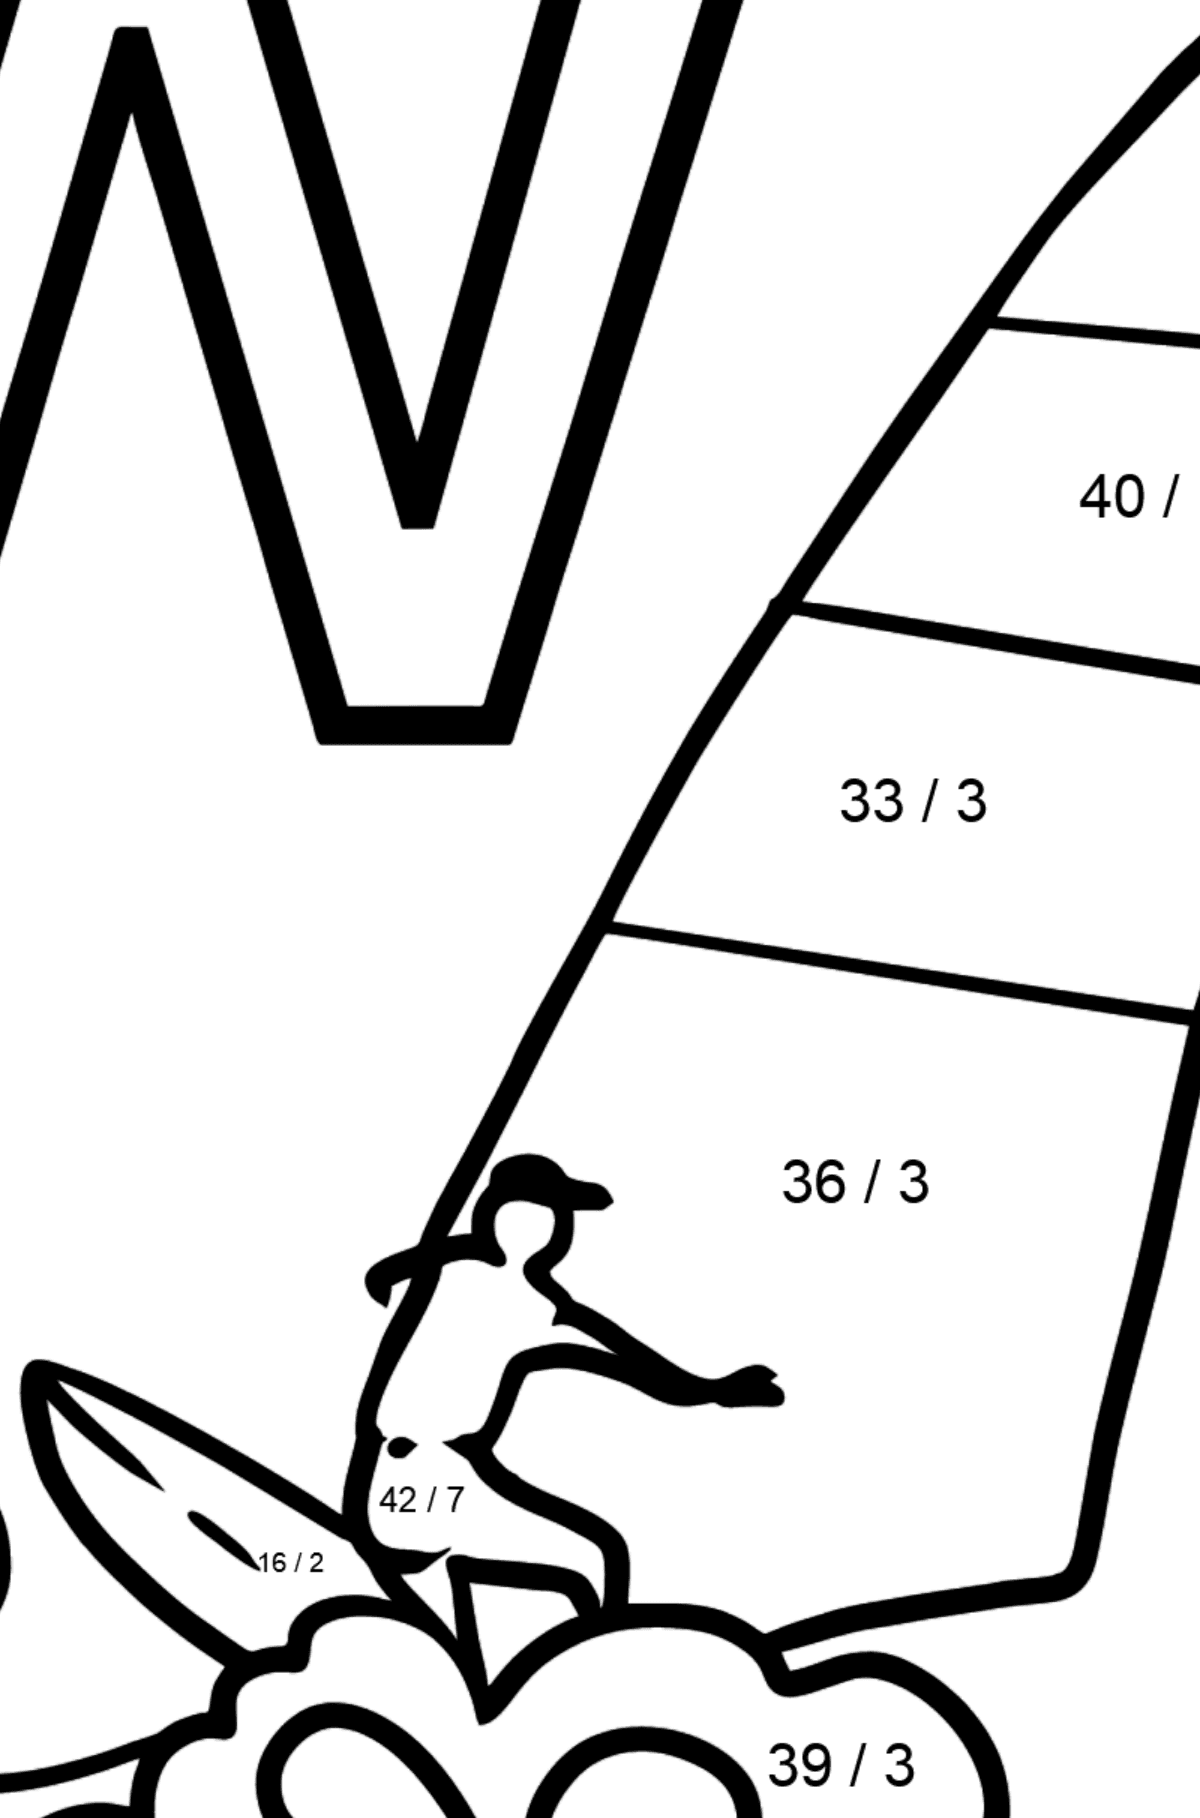 Spanish Letter W coloring pages - WINDSURF - Math Coloring - Division for Kids